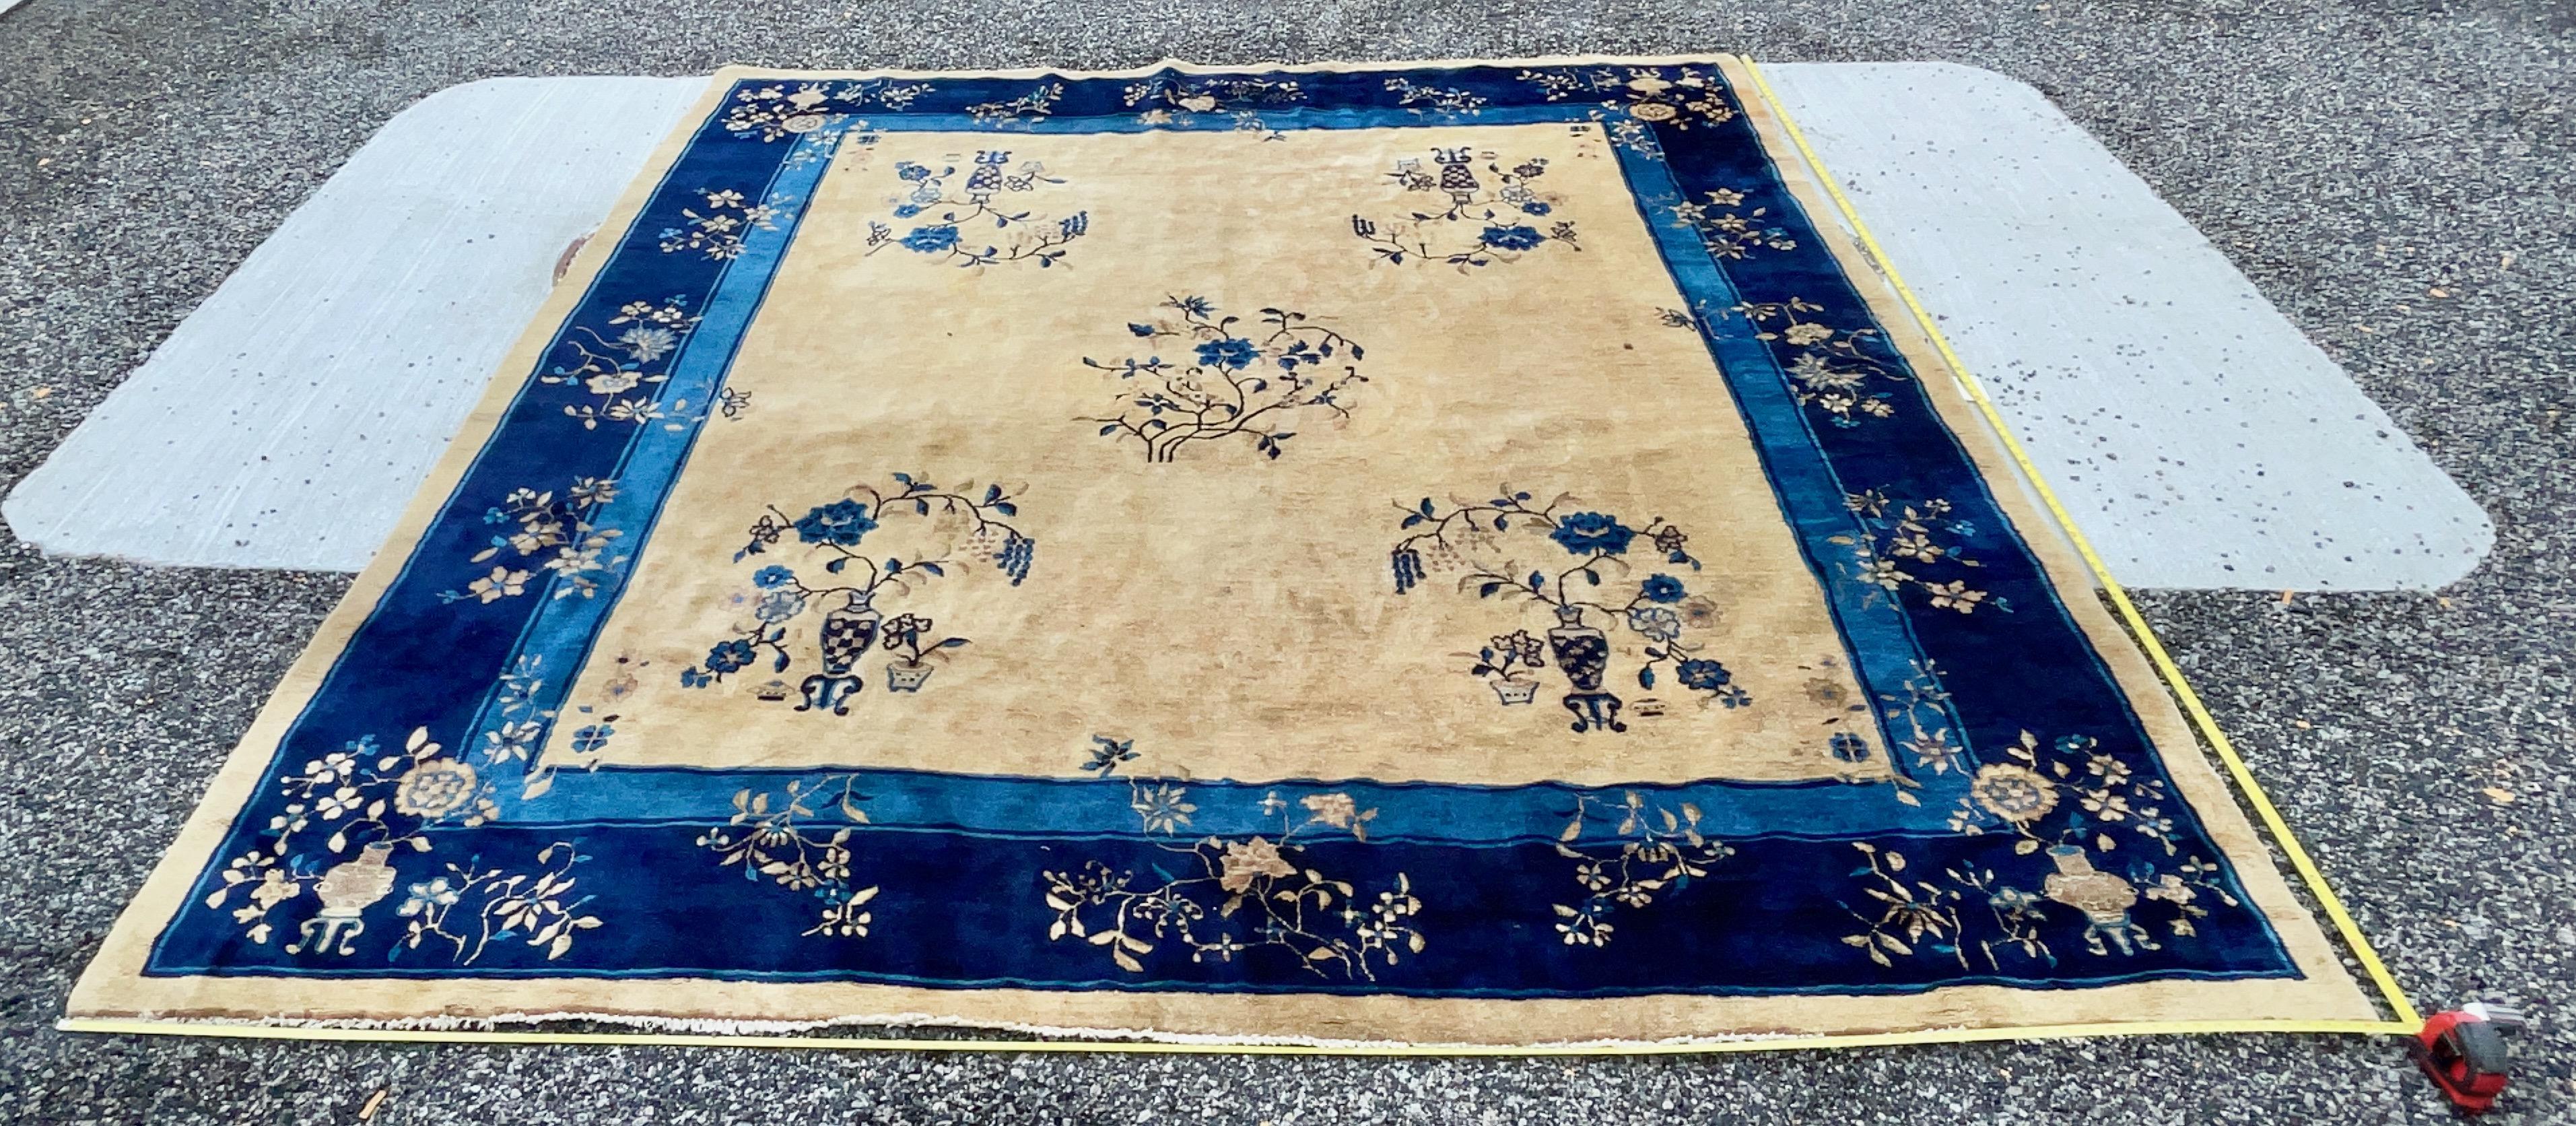 1920's Peking Chinese Art Deco Rug 9' x 10' For Sale 12